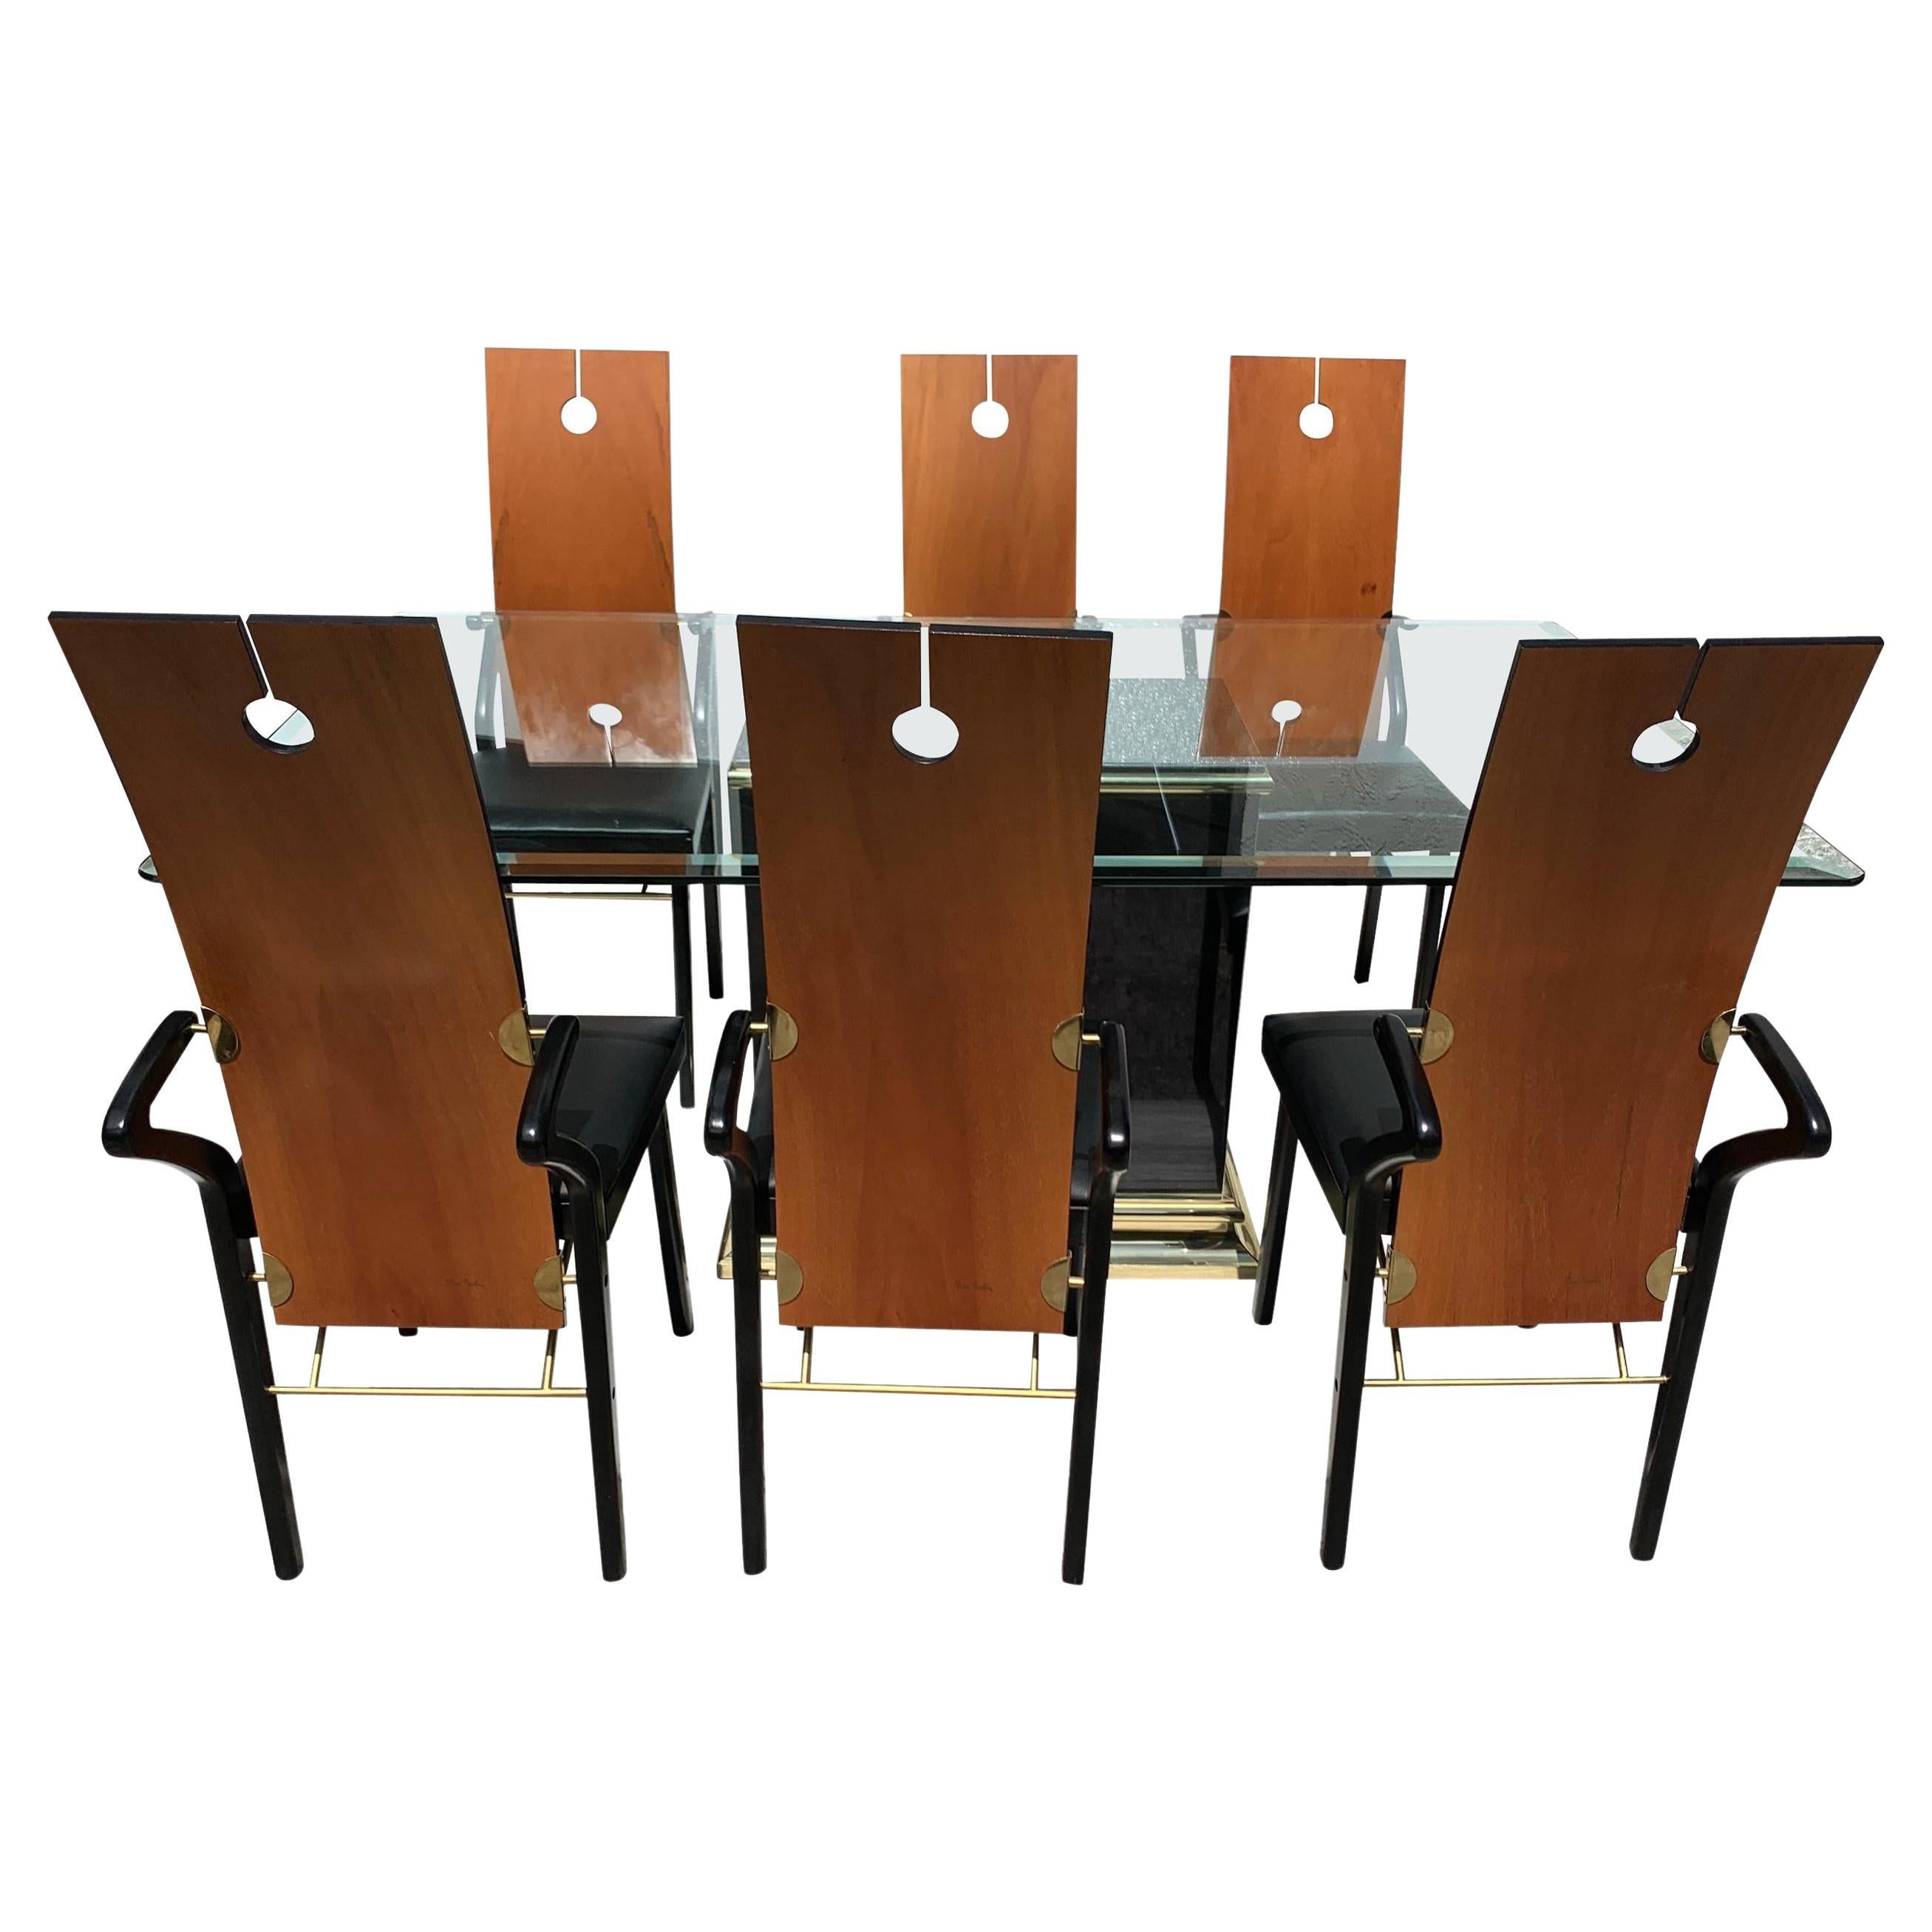 Pierre Cardin Dining Room Set, 6 Keyhole Back Arm Chairs #26406 & Pedestal Table